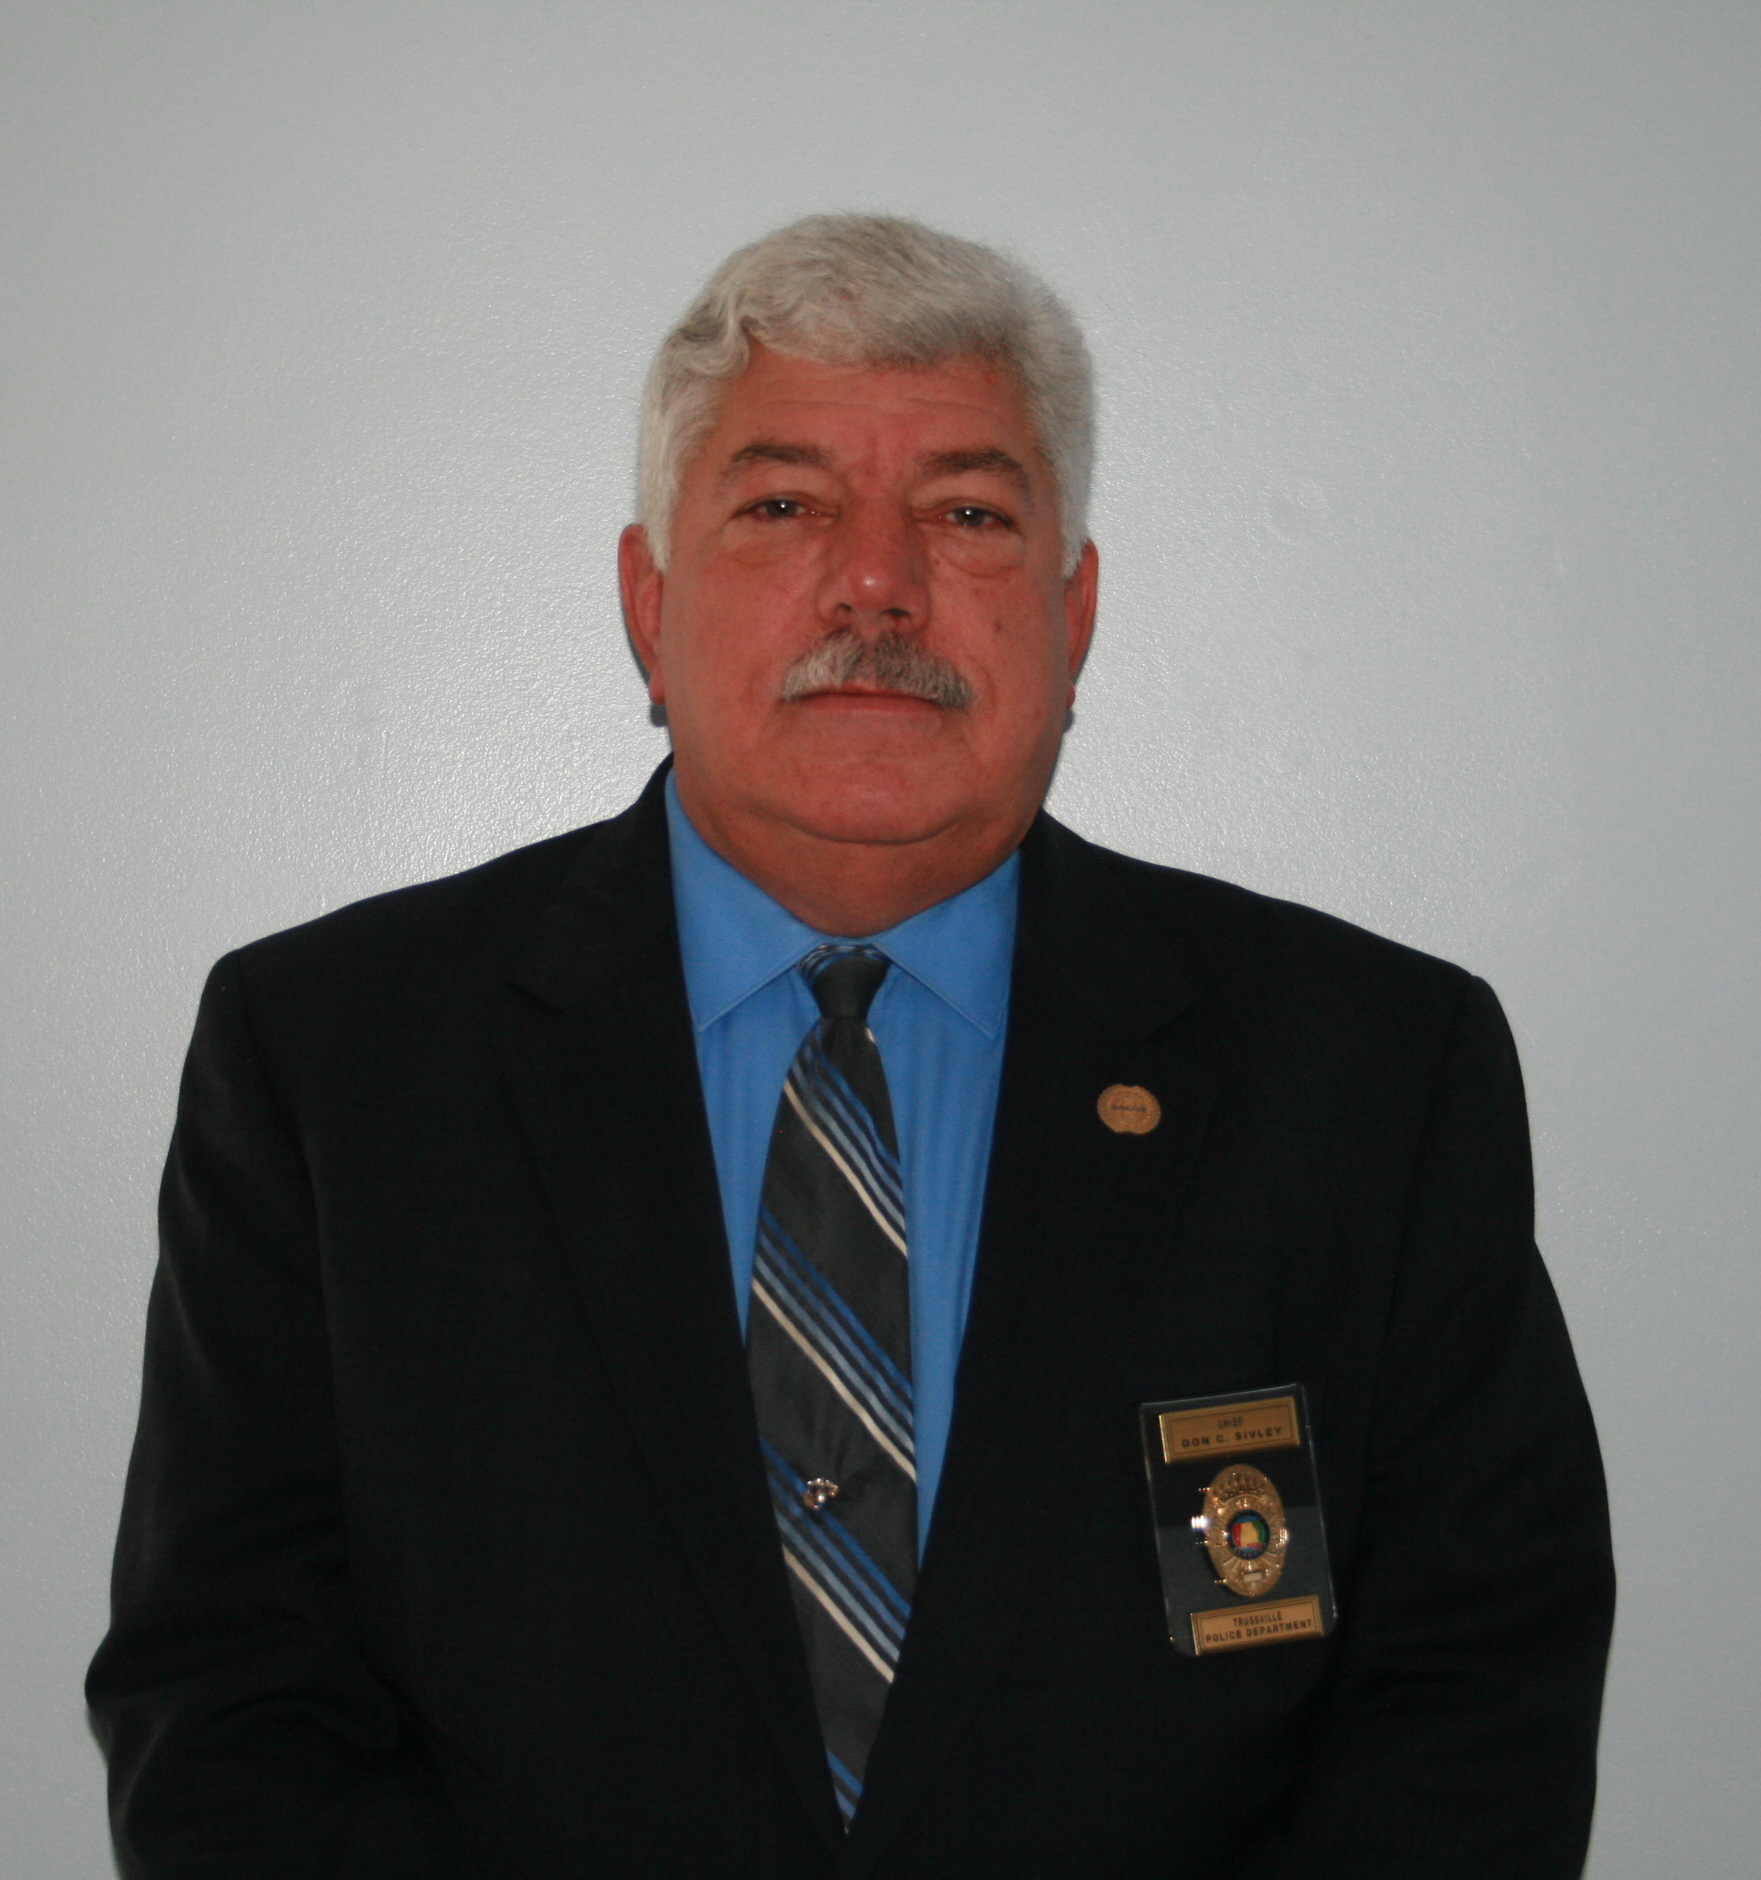 Trussville police chief to retire after 40 years of service